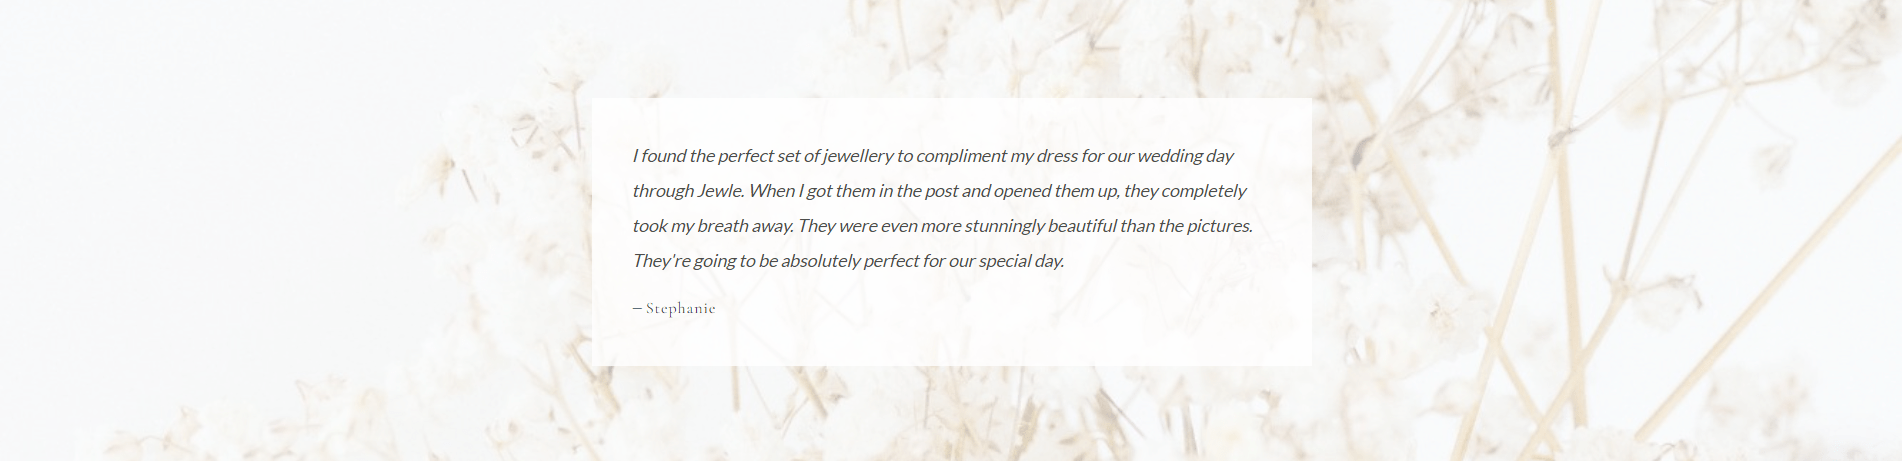 A testimonial featured on the Jewle website with a floral background